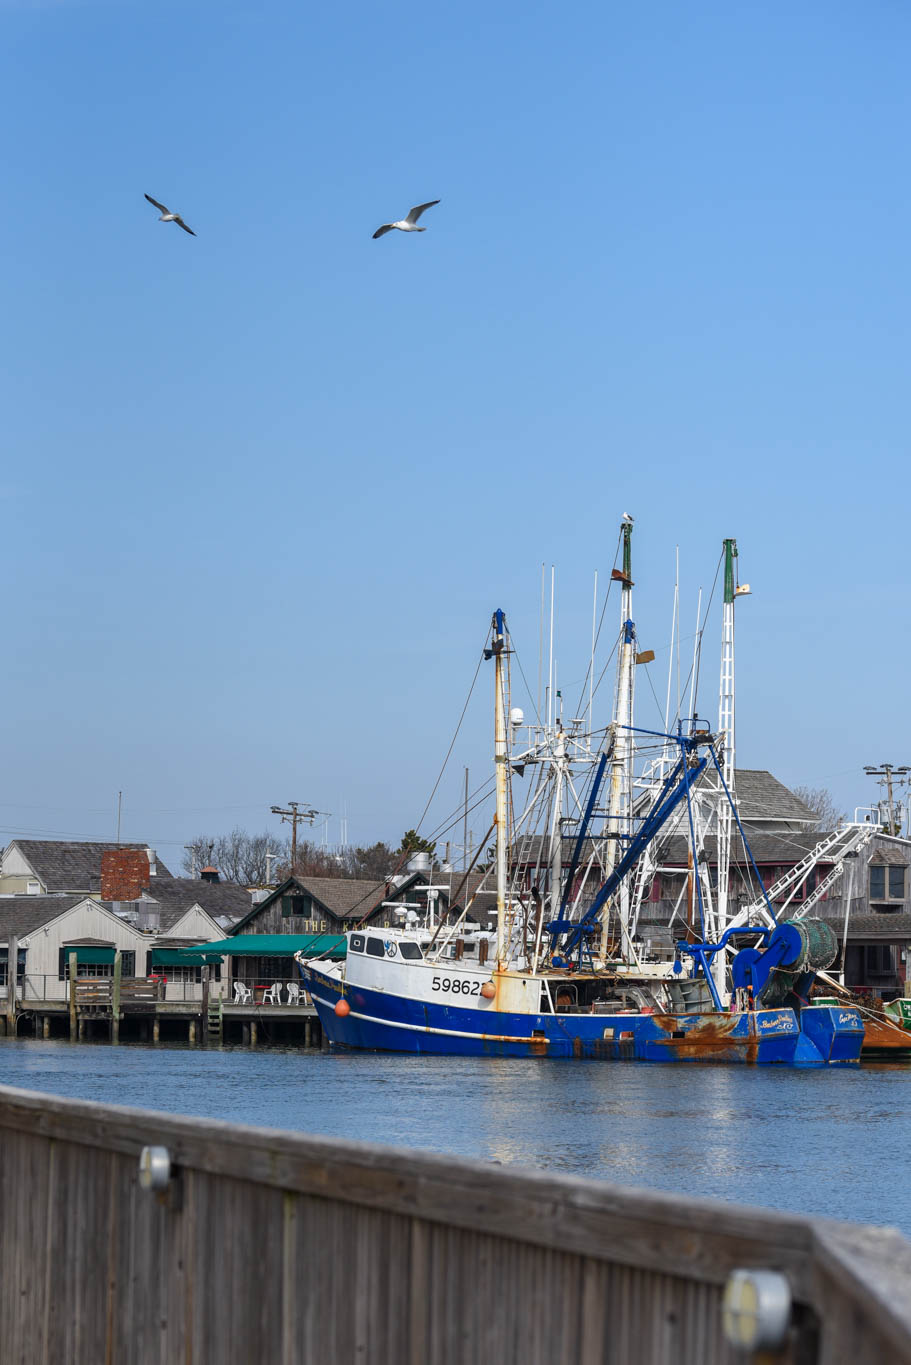 Seagulls Flying Over The Harbor with the Lobster house and fishing boat at the dock.